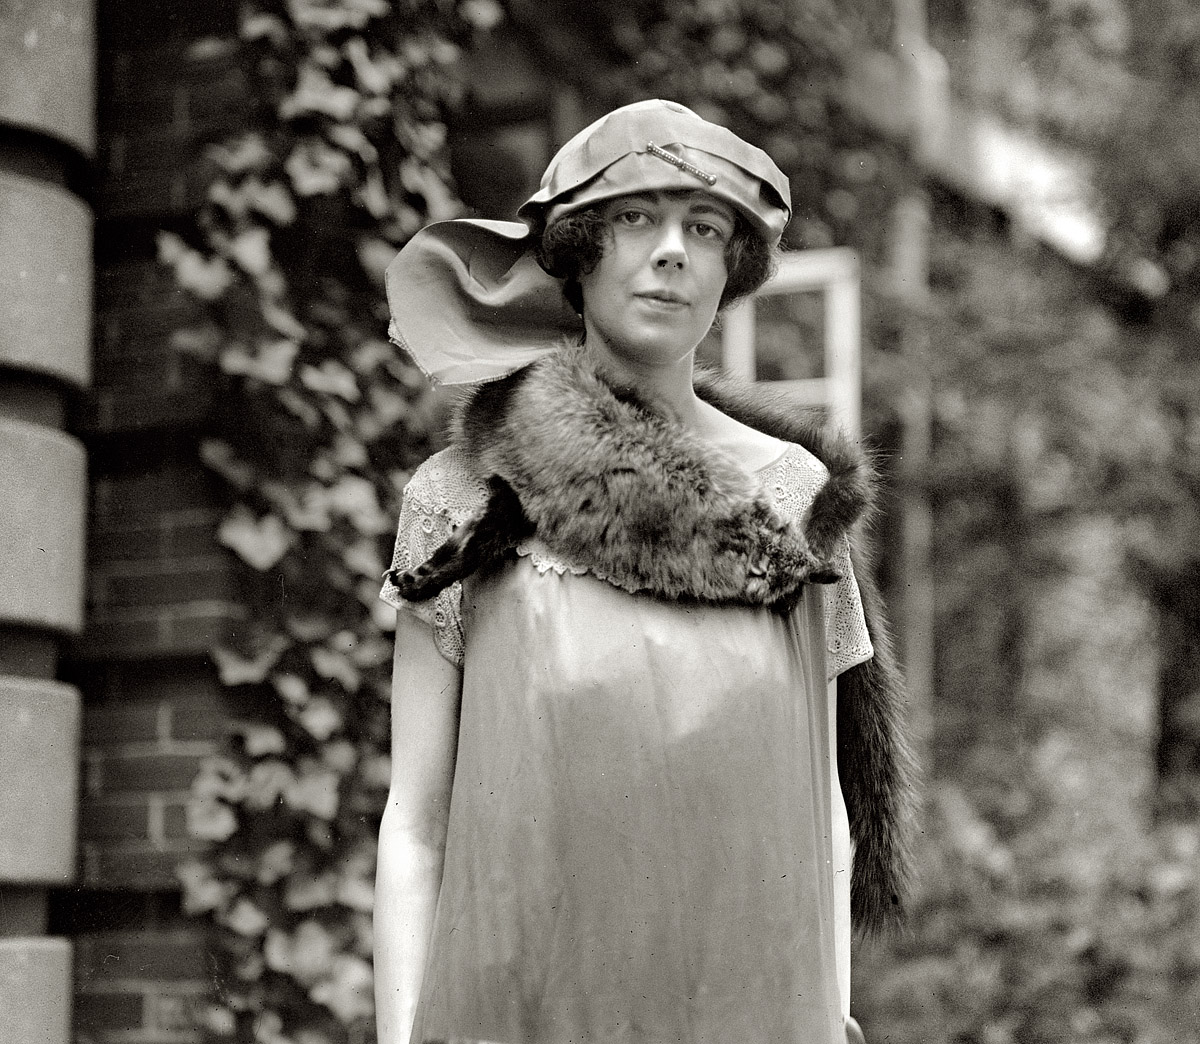 August 18, 1924. Washington, D.C. "Miss Beatrice Beck, daughter of Solicitor General James M. Beck." View full size. National Photo Company Collection.